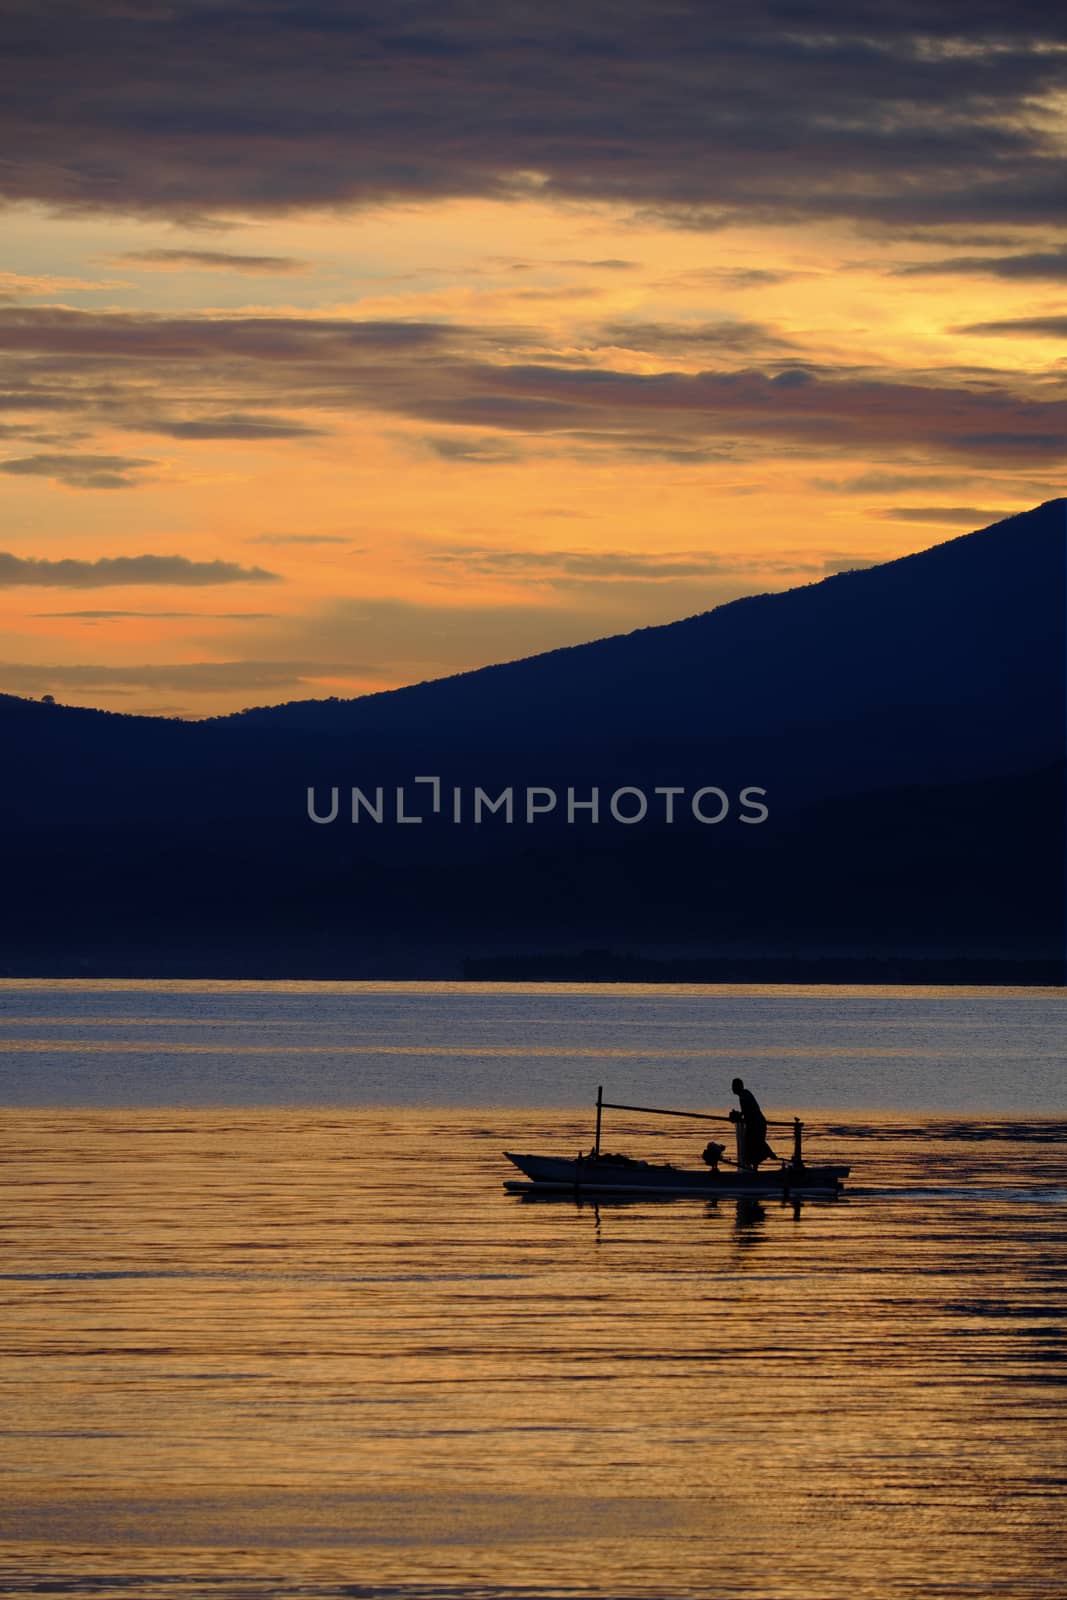 Indonesian fisherman in the morning by rainfallsup